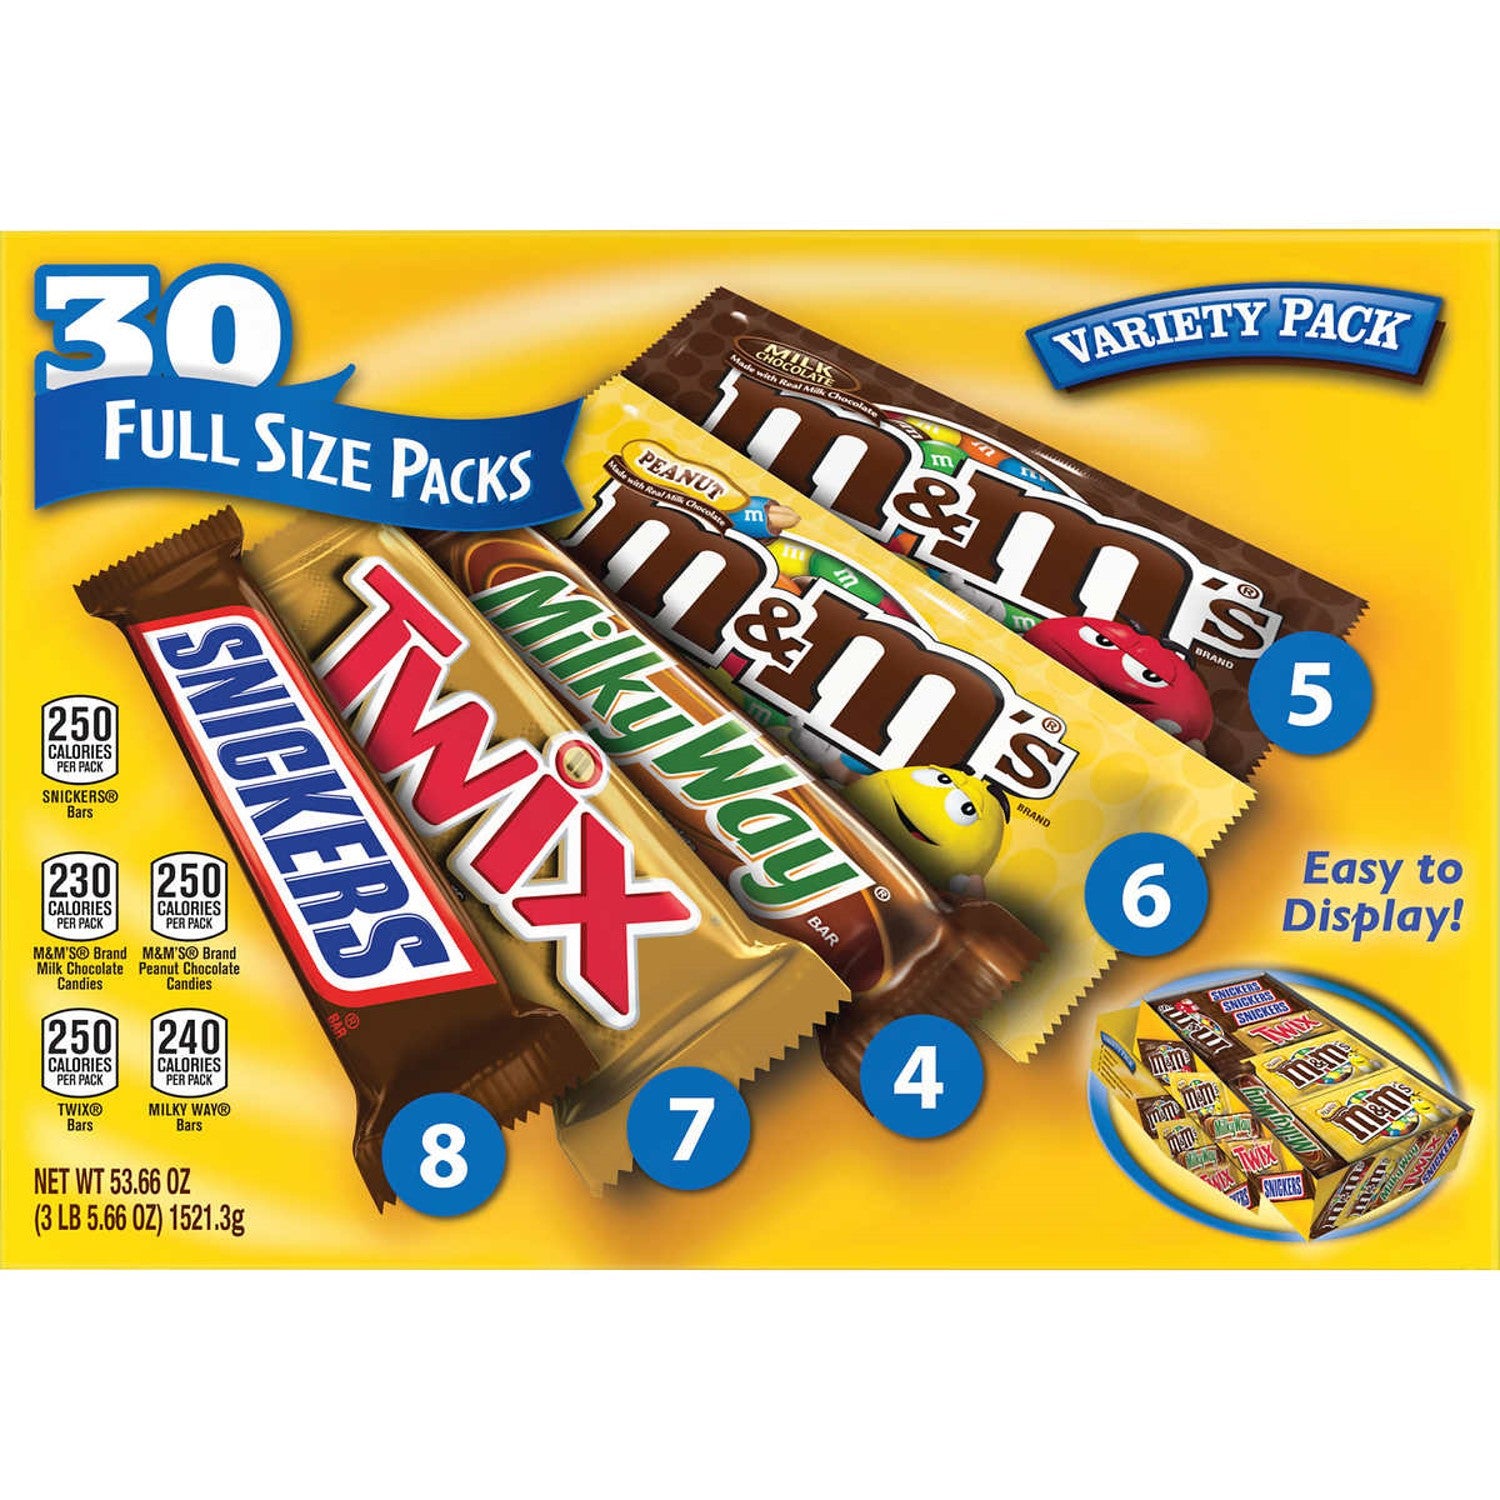 Snickers Full Size Candy Chocolate Bar - 1,86 oz Bar Cote dIvoire